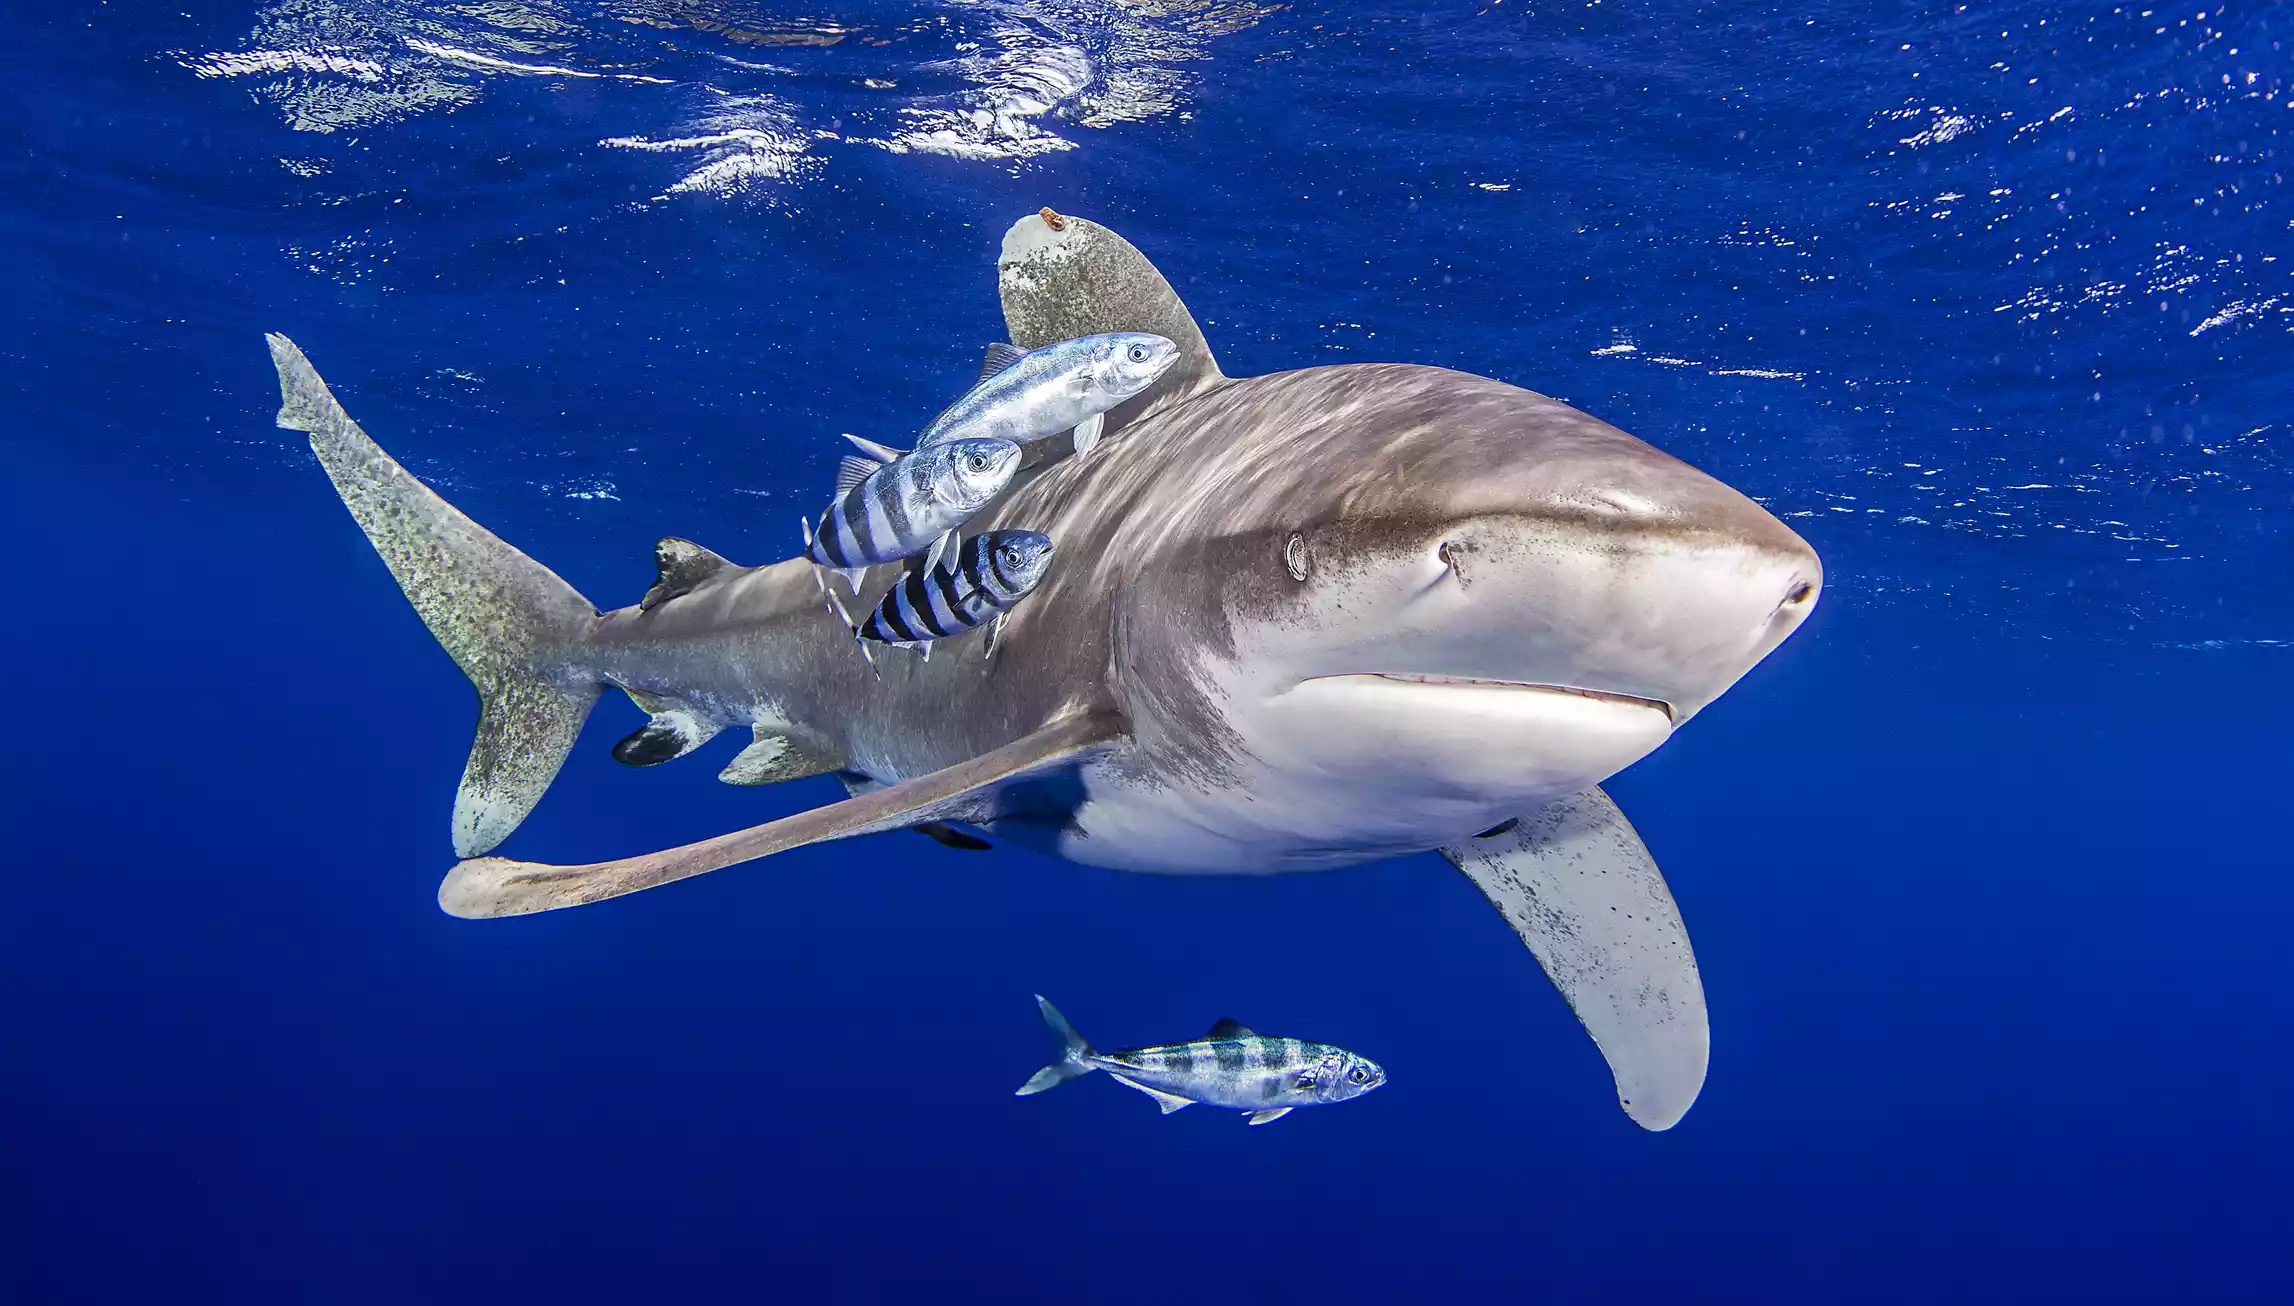 Grey Oceanic Whitetip Shark with blue striped pilot fish around it swimming in the ocean